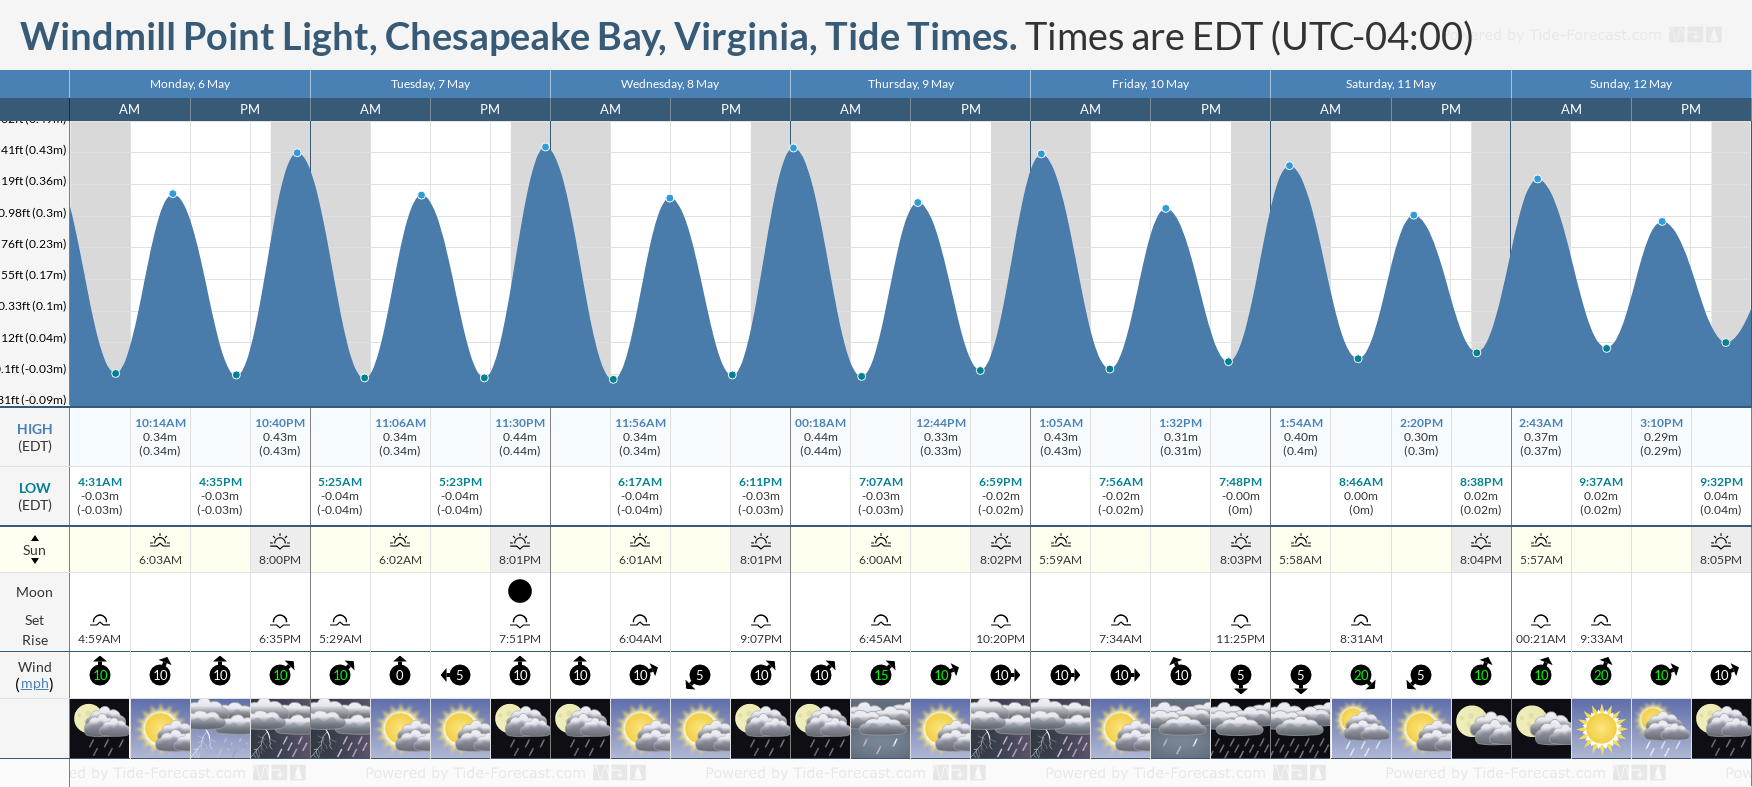 Windmill Point Light, Chesapeake Bay, Virginia Tide Chart including high and low tide tide times for the next 7 days